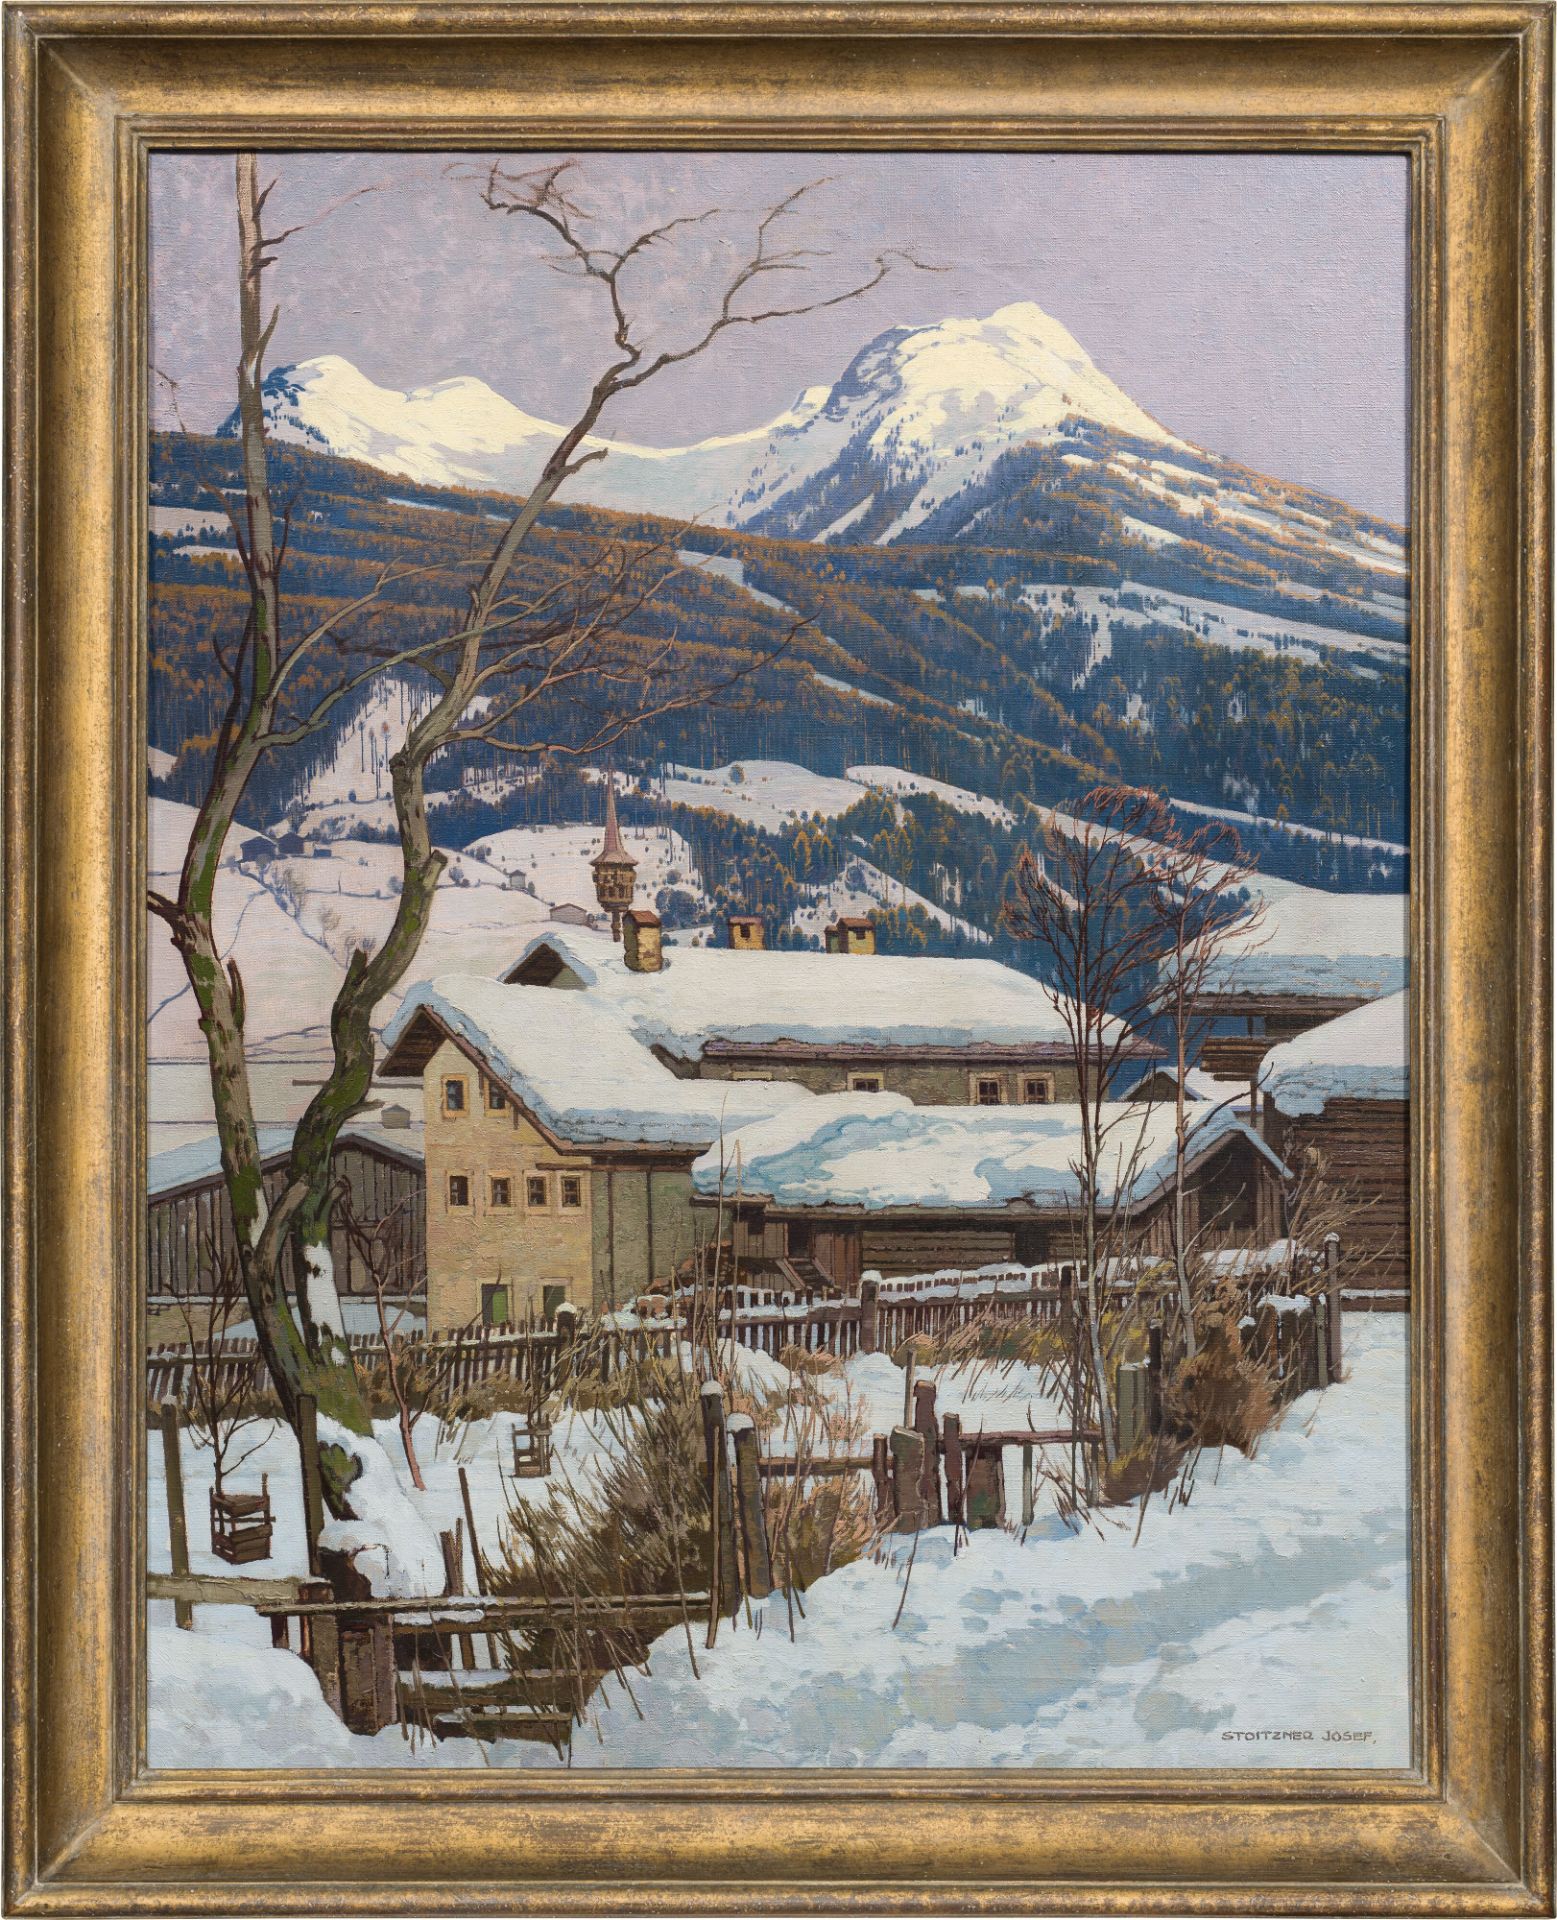 Josef StoitznerTanzlehen in Brambergc. 1935oil on canvas; framed116 x 90 cmsigned on the lower - Image 2 of 3